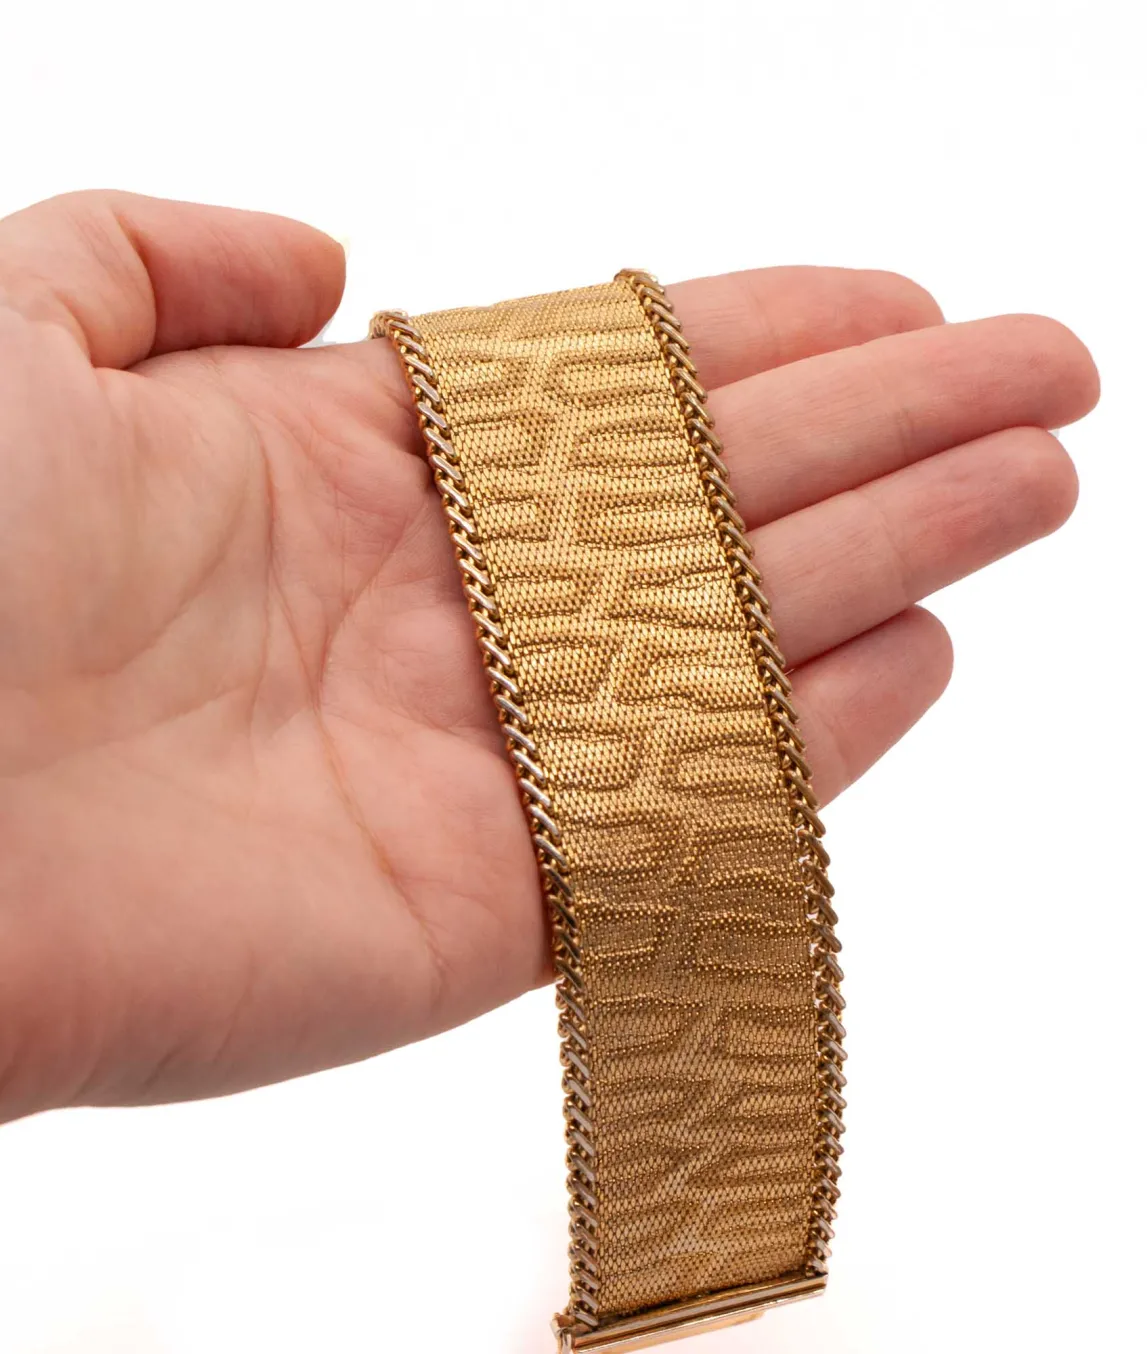 Gold tone woven bracelet featuring a leopard style print held in a hand